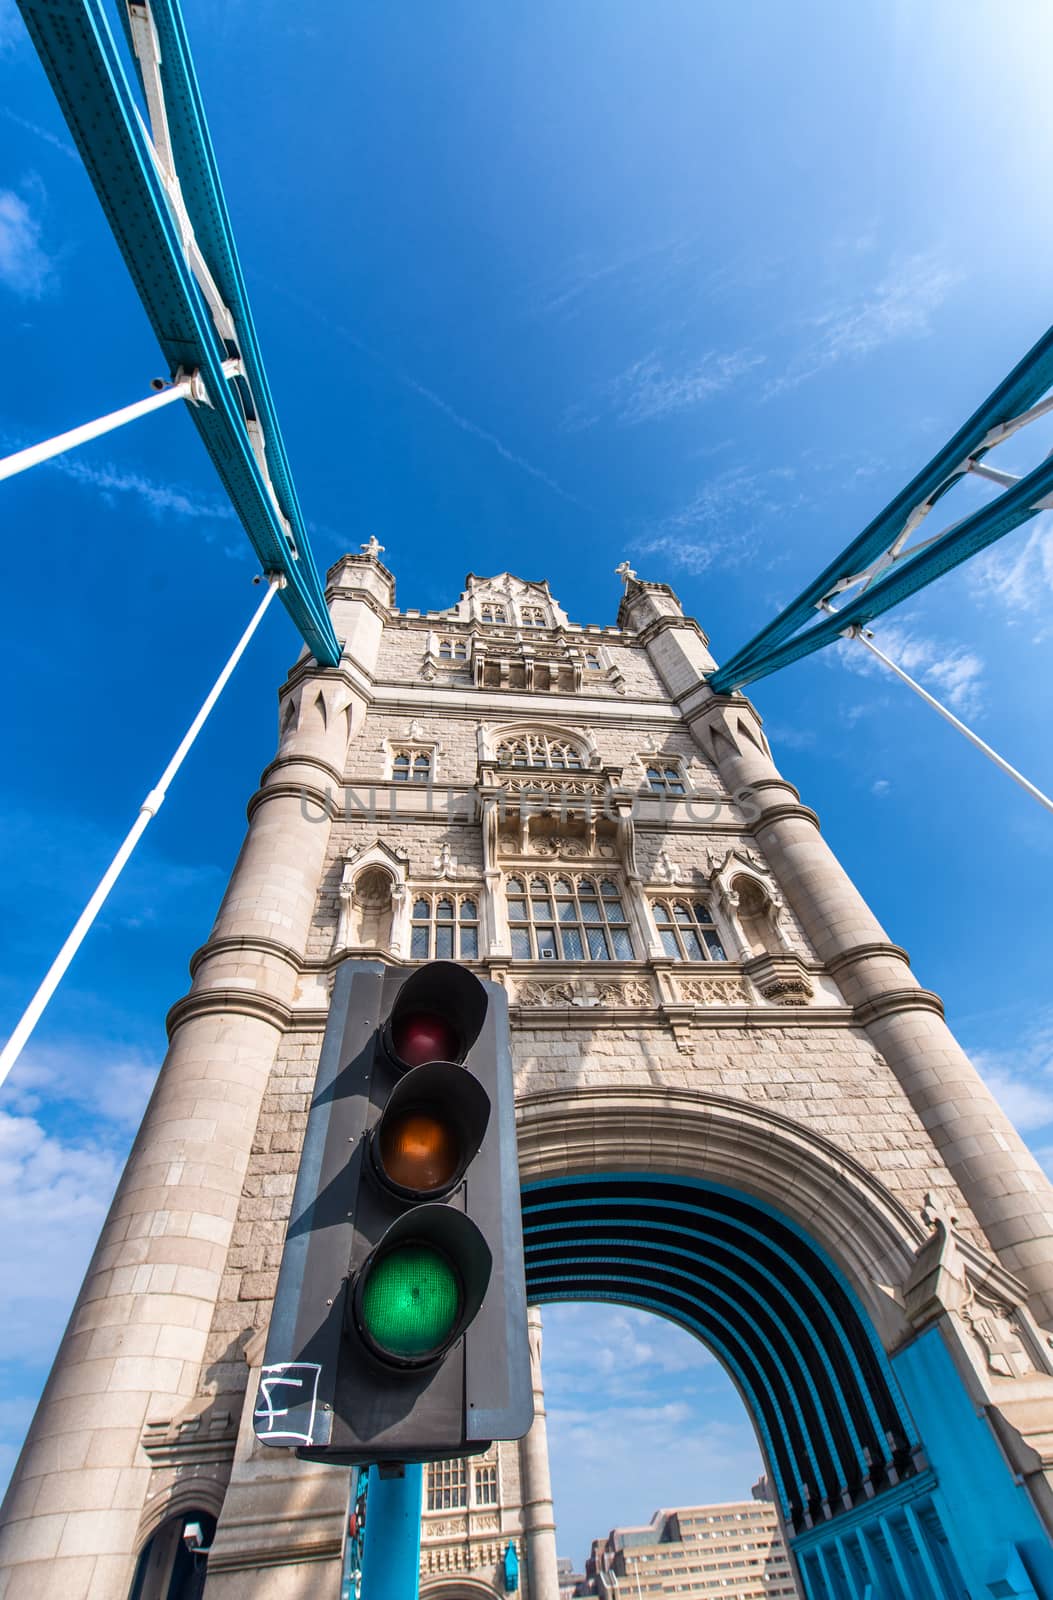 London. Tower Bridge structure on a sunny day by jovannig